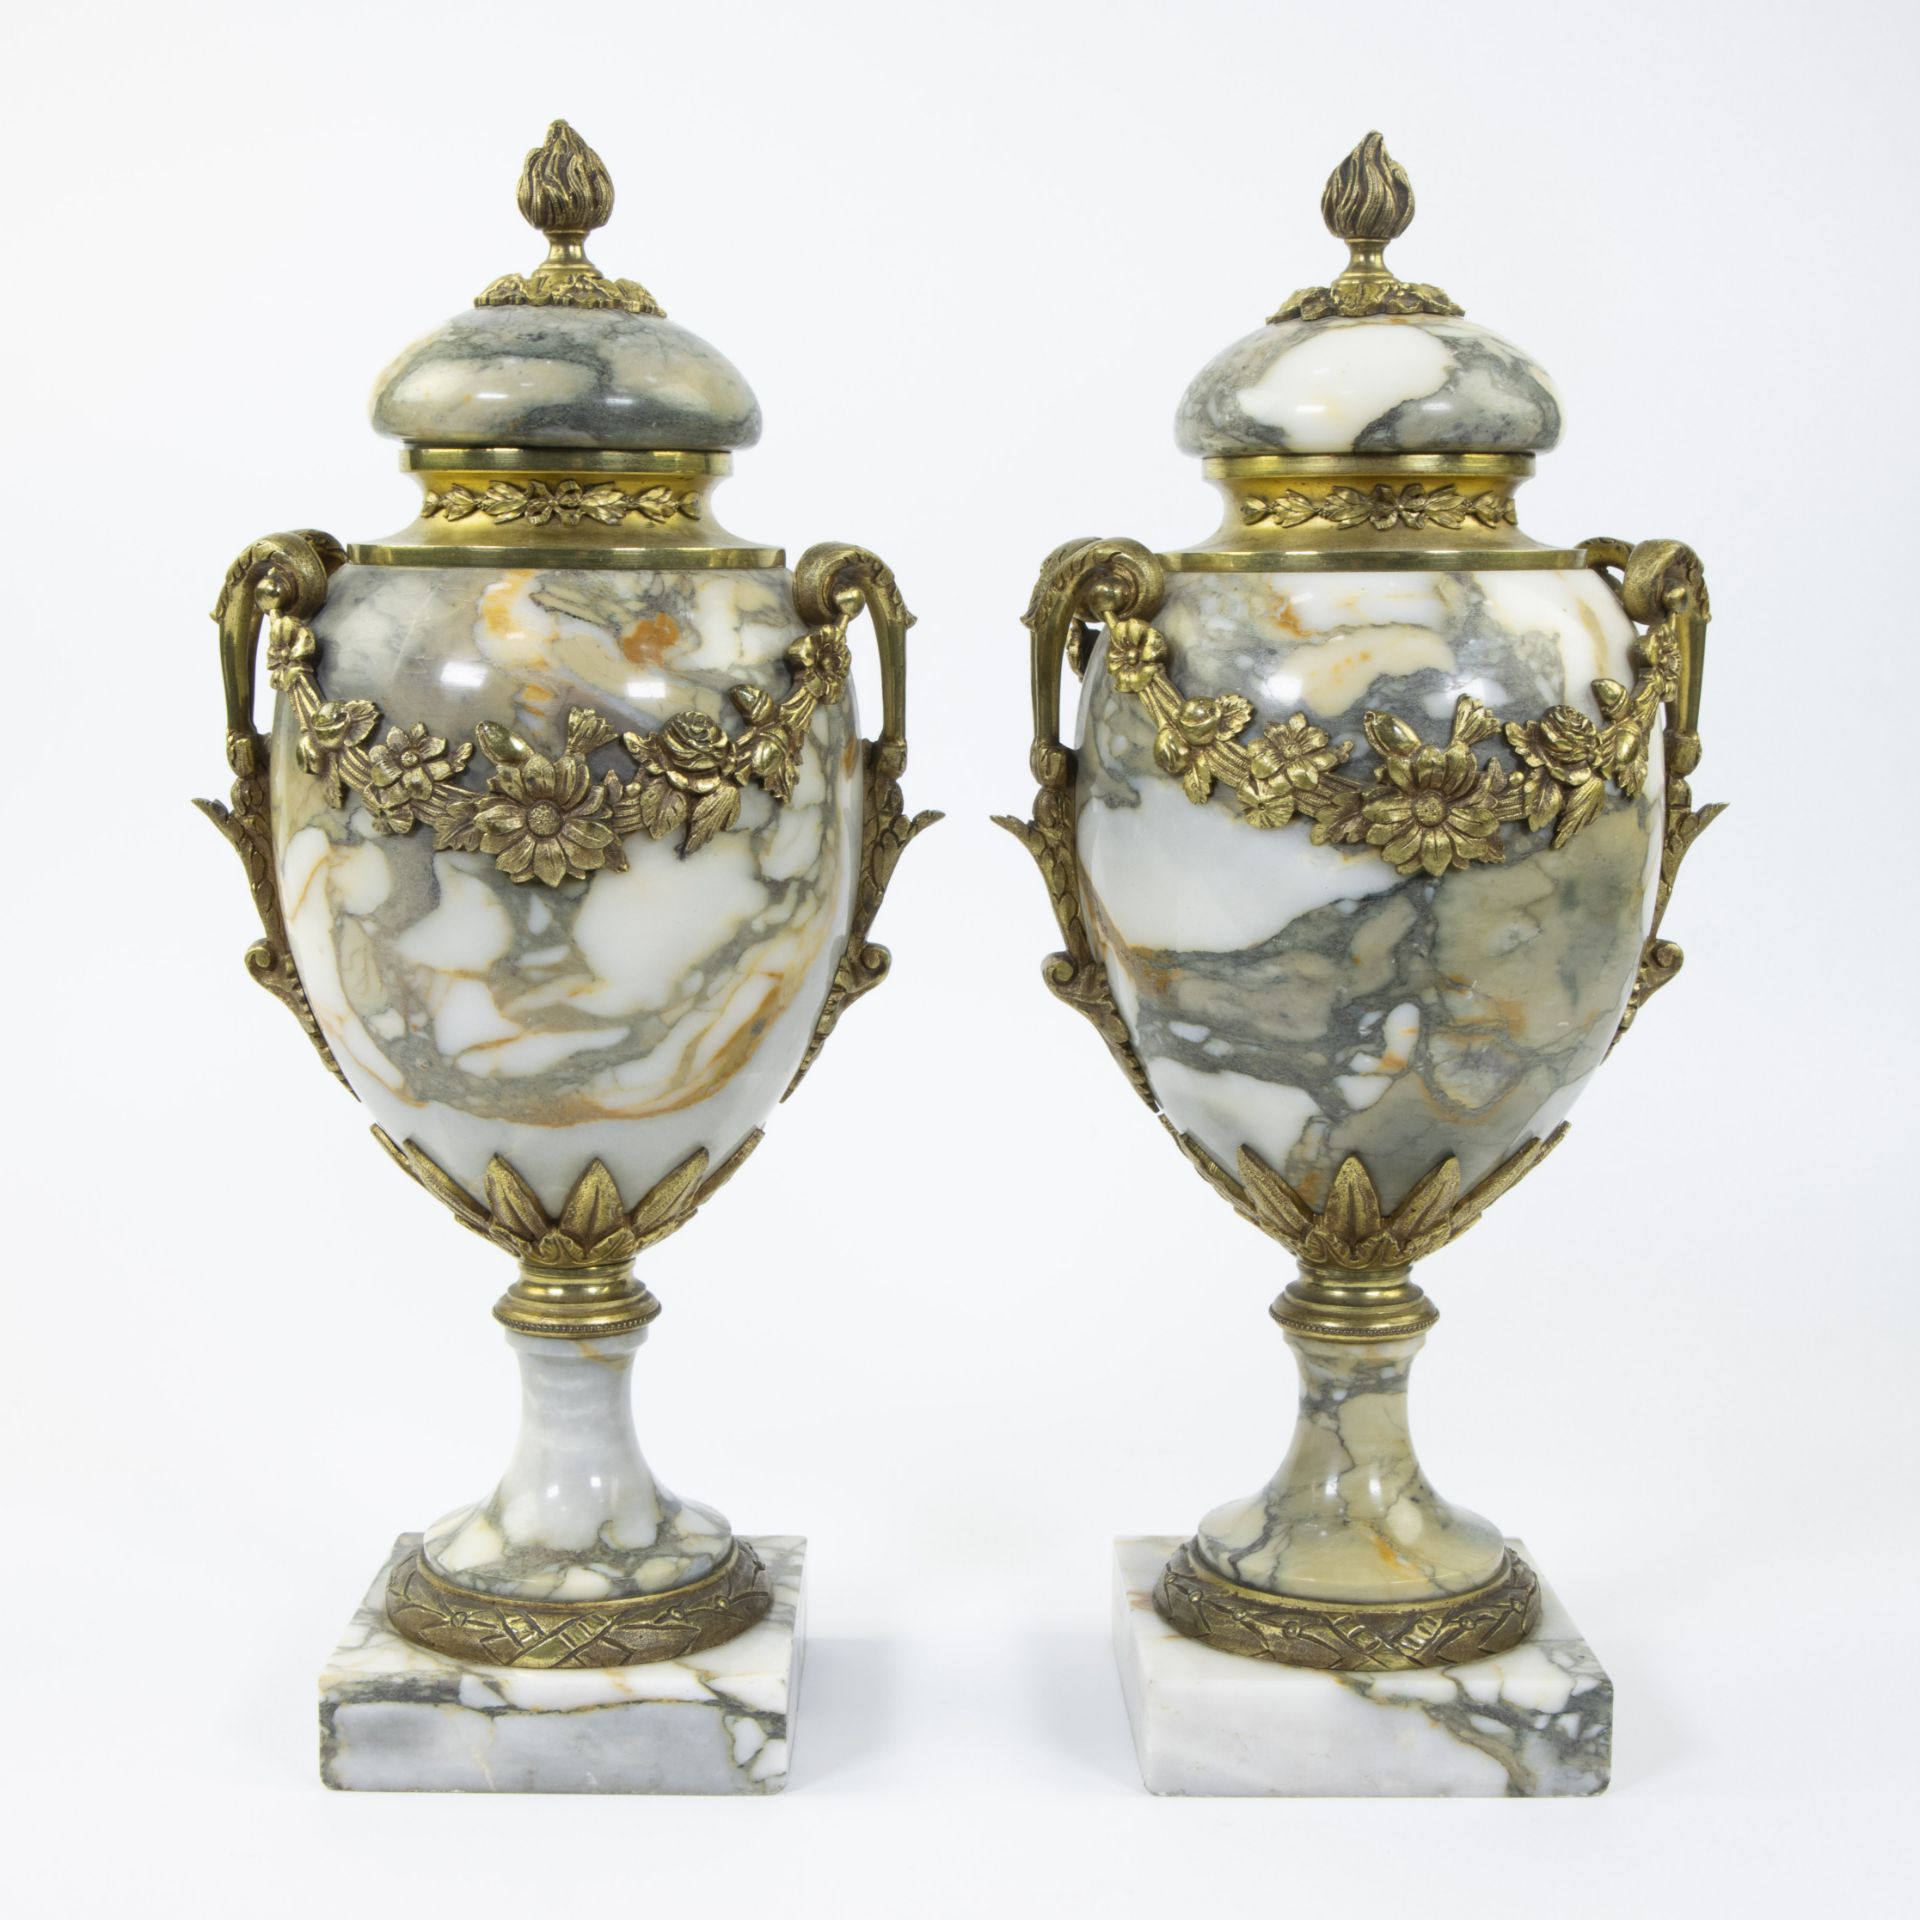 Pair of casolettes in grey veined marble decorated with gilded garlands